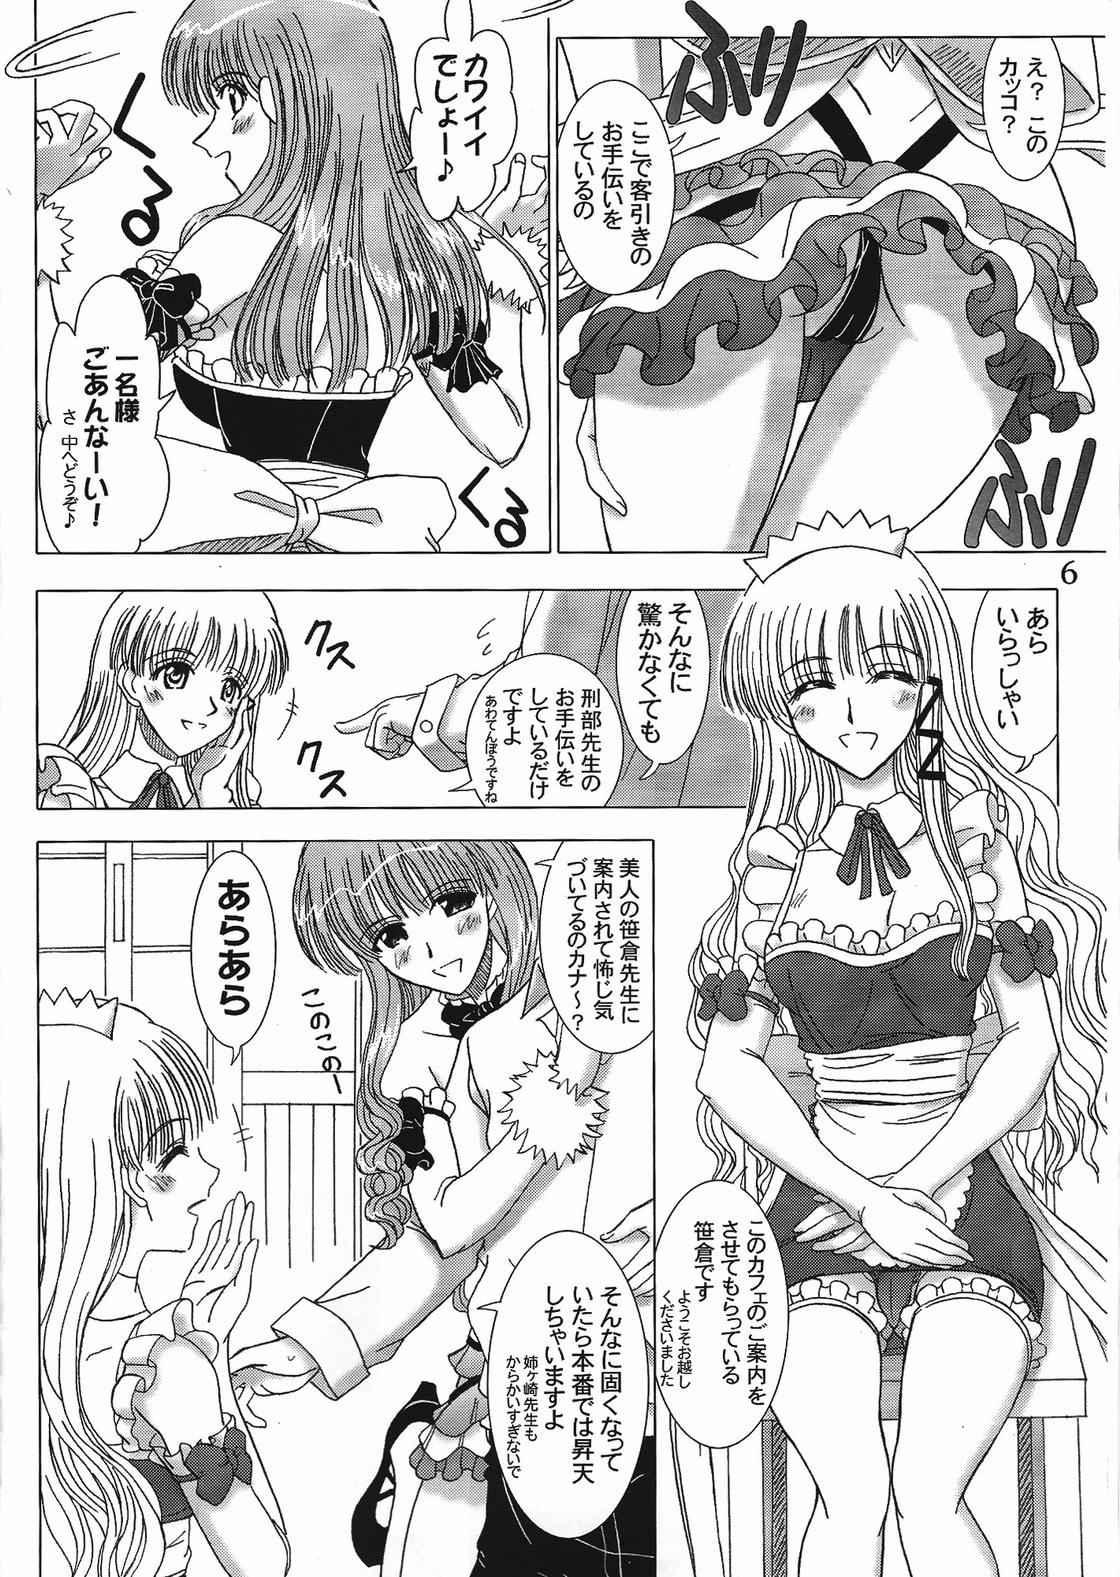 Fingering Cafe Tea Ceremony Club - School rumble Brunettes - Page 5